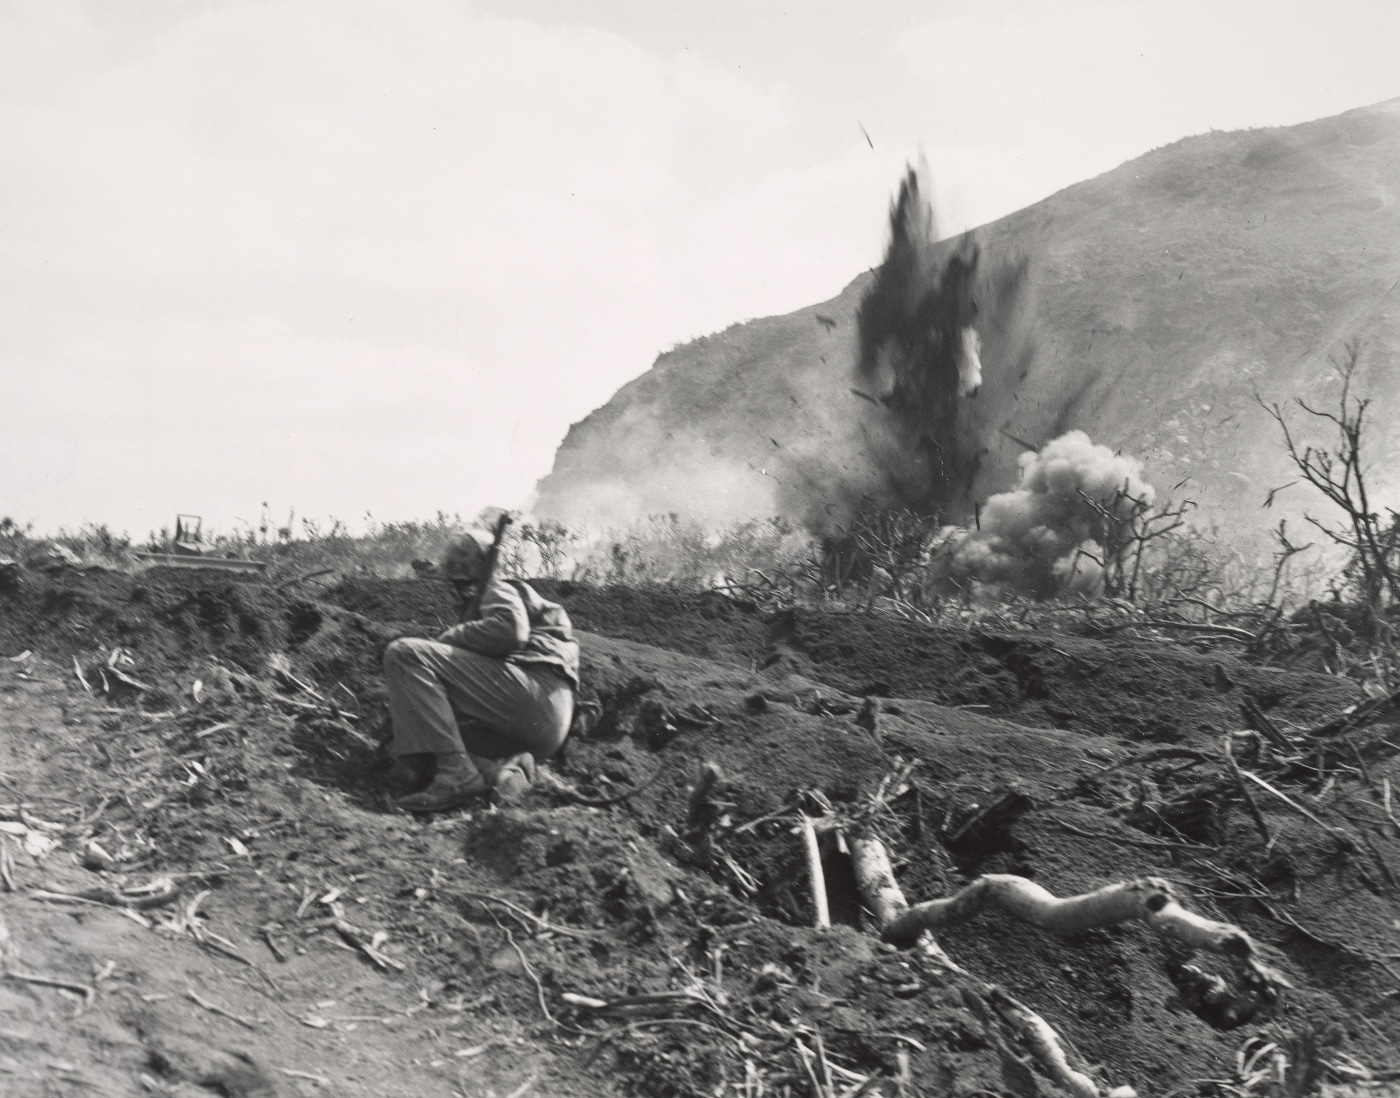 We see naval gunfire hitting Japanese positions at the base of the volcano. In the foreground is a U.S. Marine waiting for the firing to lift so he can move forward.